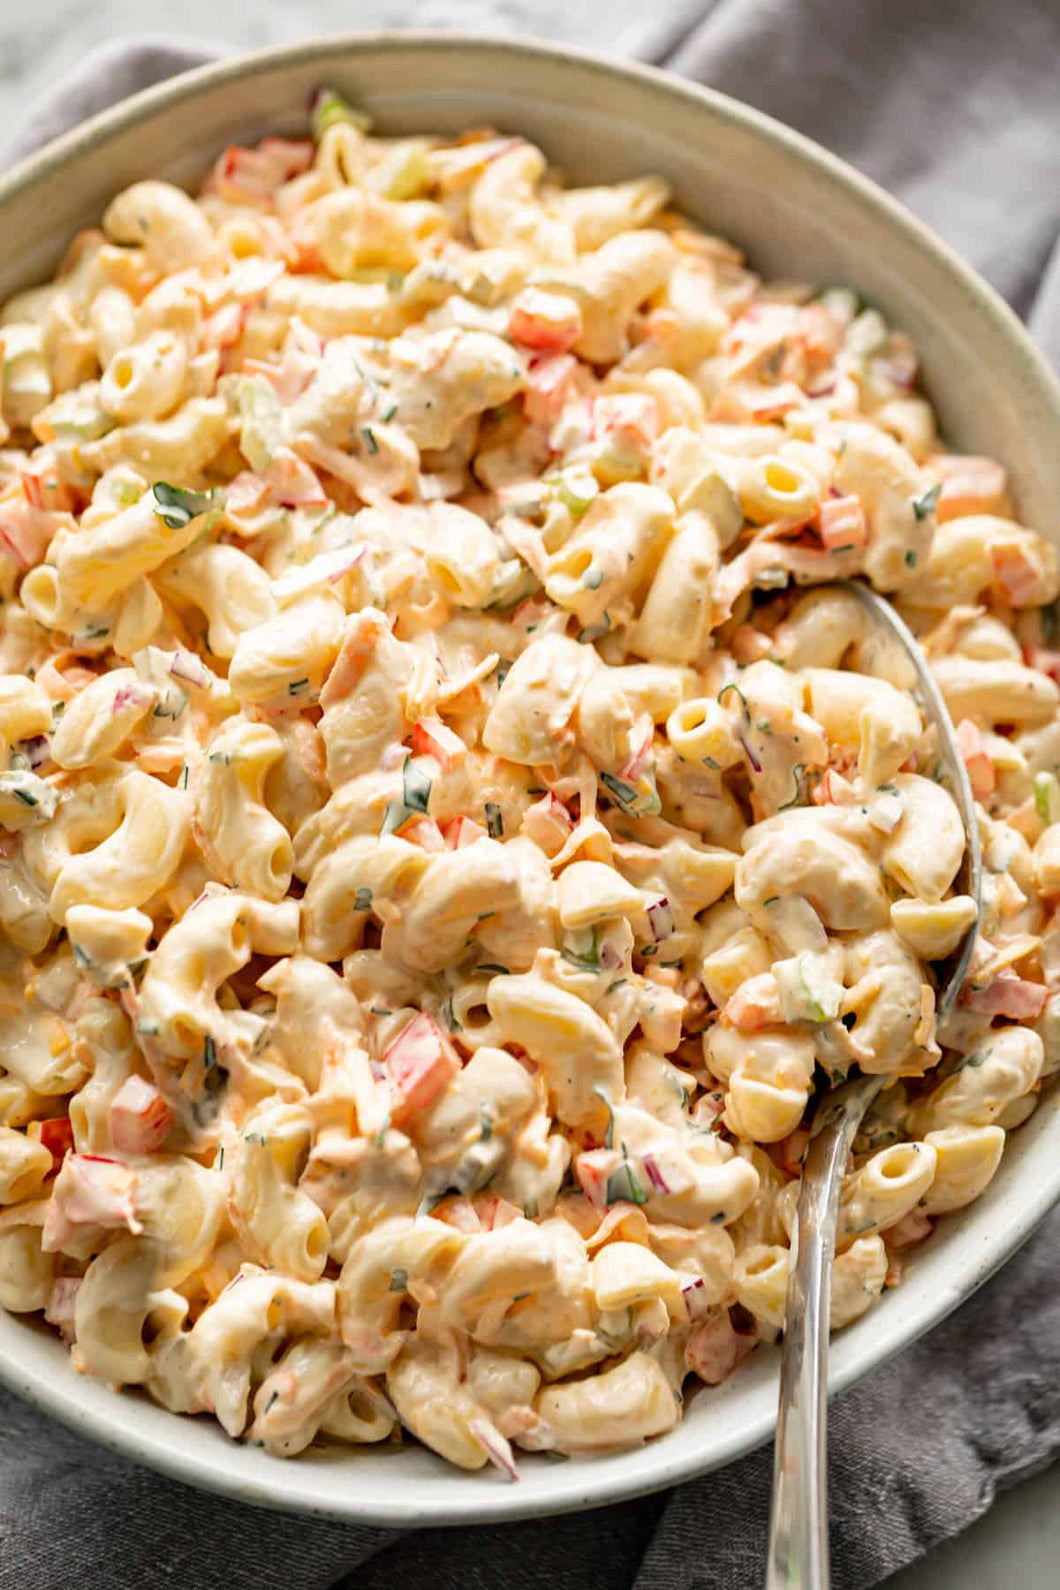 NEW! 38 ounce Container of Macaroni Salad for Memorial Day